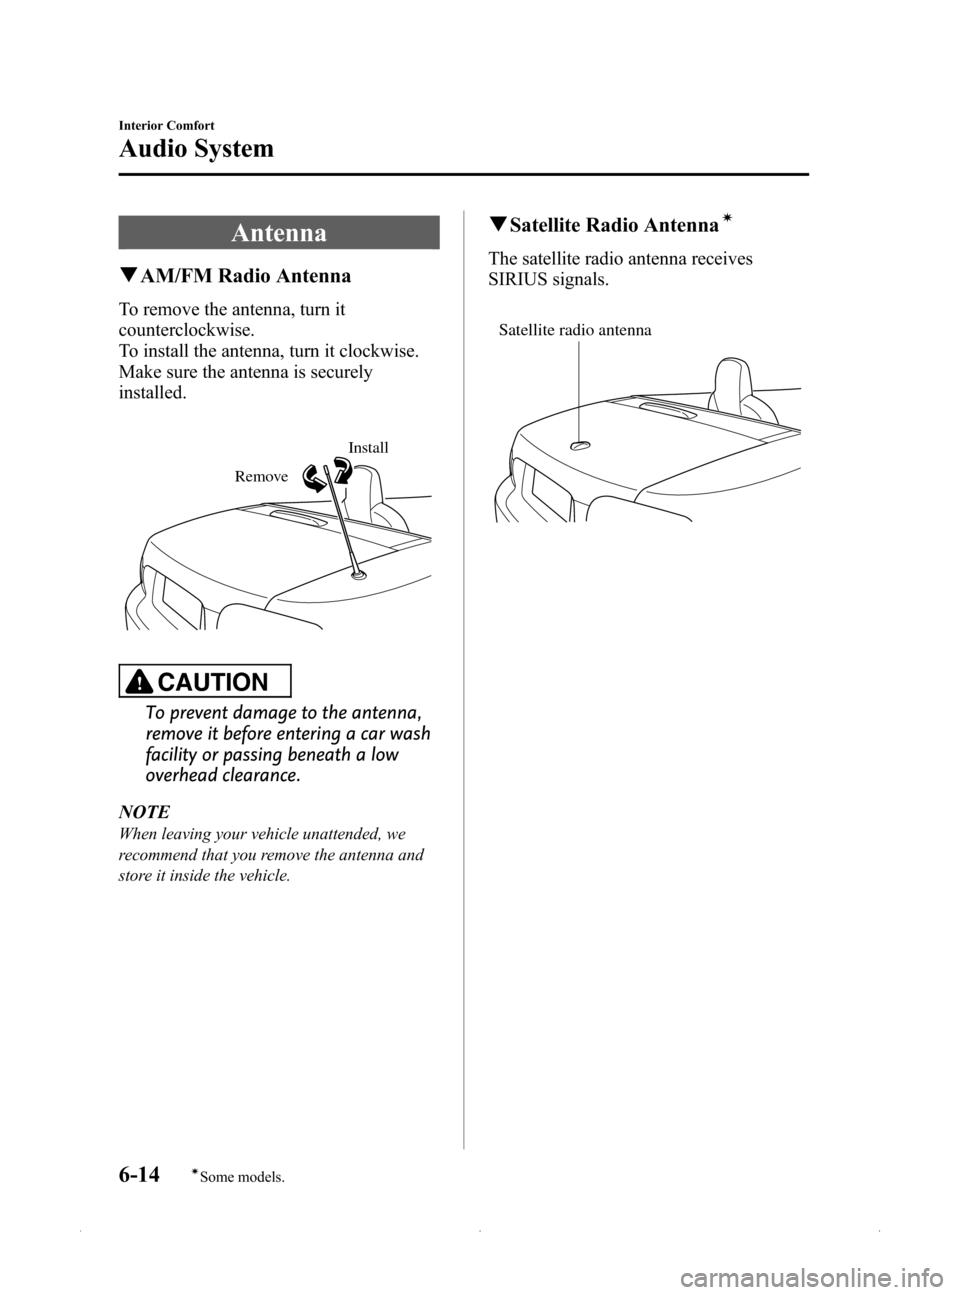 MAZDA MODEL MX-5 PRHT 2015  Owners Manual (in English) Black plate (226,1)
Antenna
qAM/FM Radio Antenna
To remove the antenna, turn it
counterclockwise.
To install the antenna, turn it clockwise.
Make sure the antenna is securely
installed.
Remove
Install